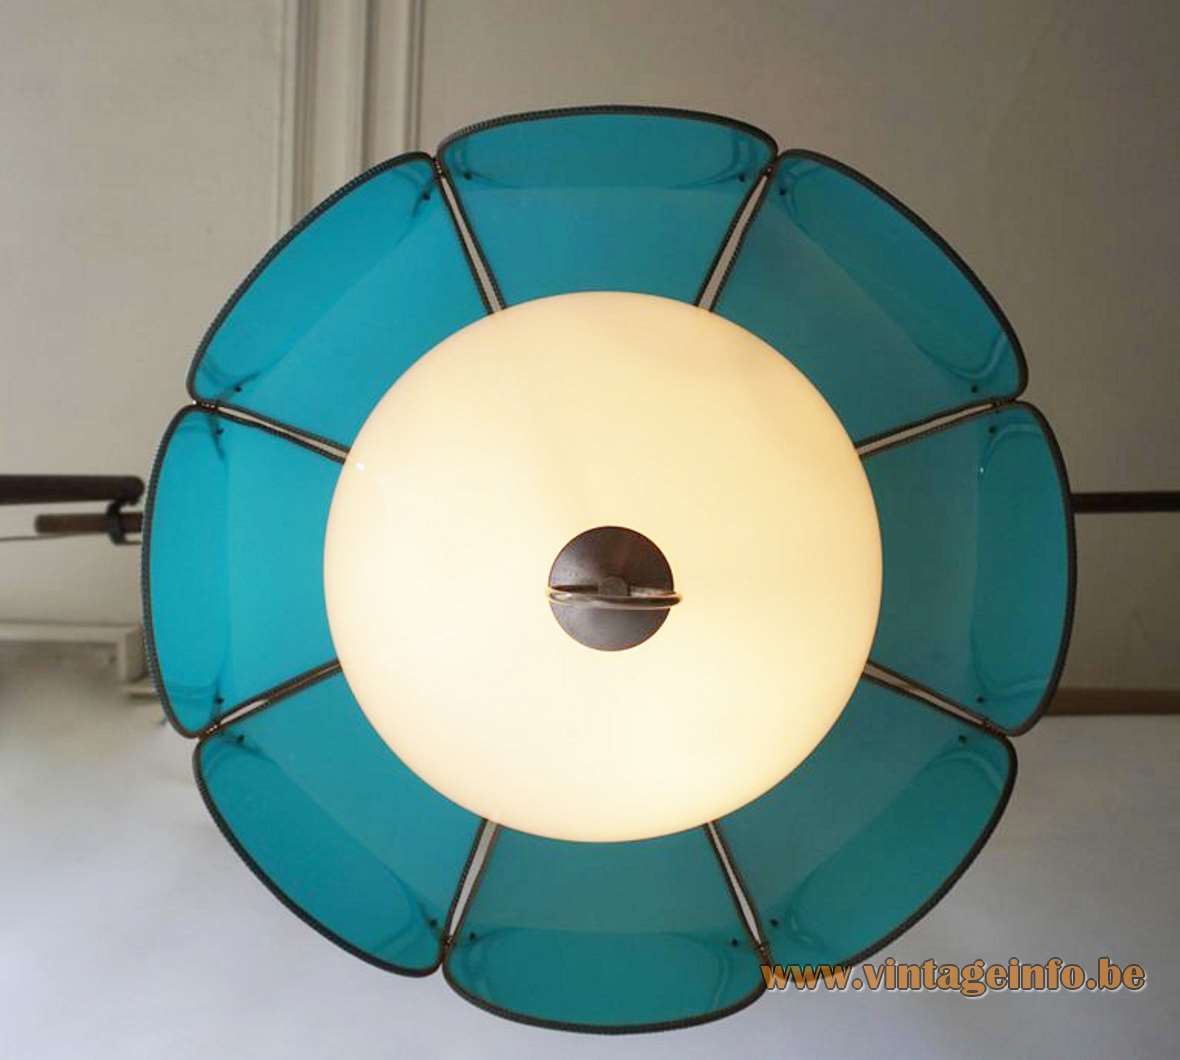 Lotus flower pendant lamp blue petals white acrylic lampshade brass chain 1960s 1950s USA swag MCM